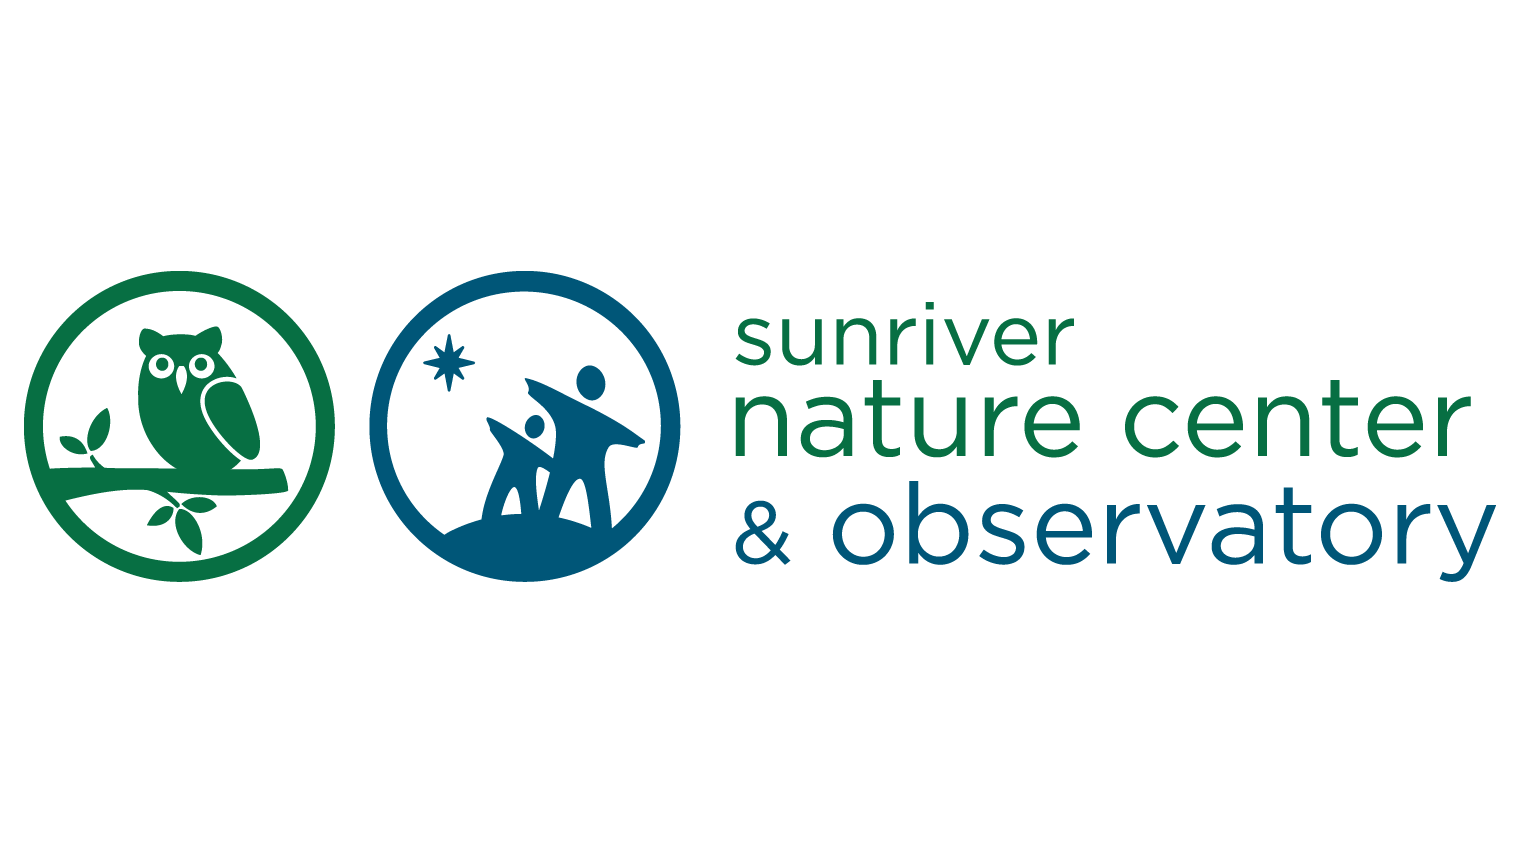 Sun river nature center and observatory logo.